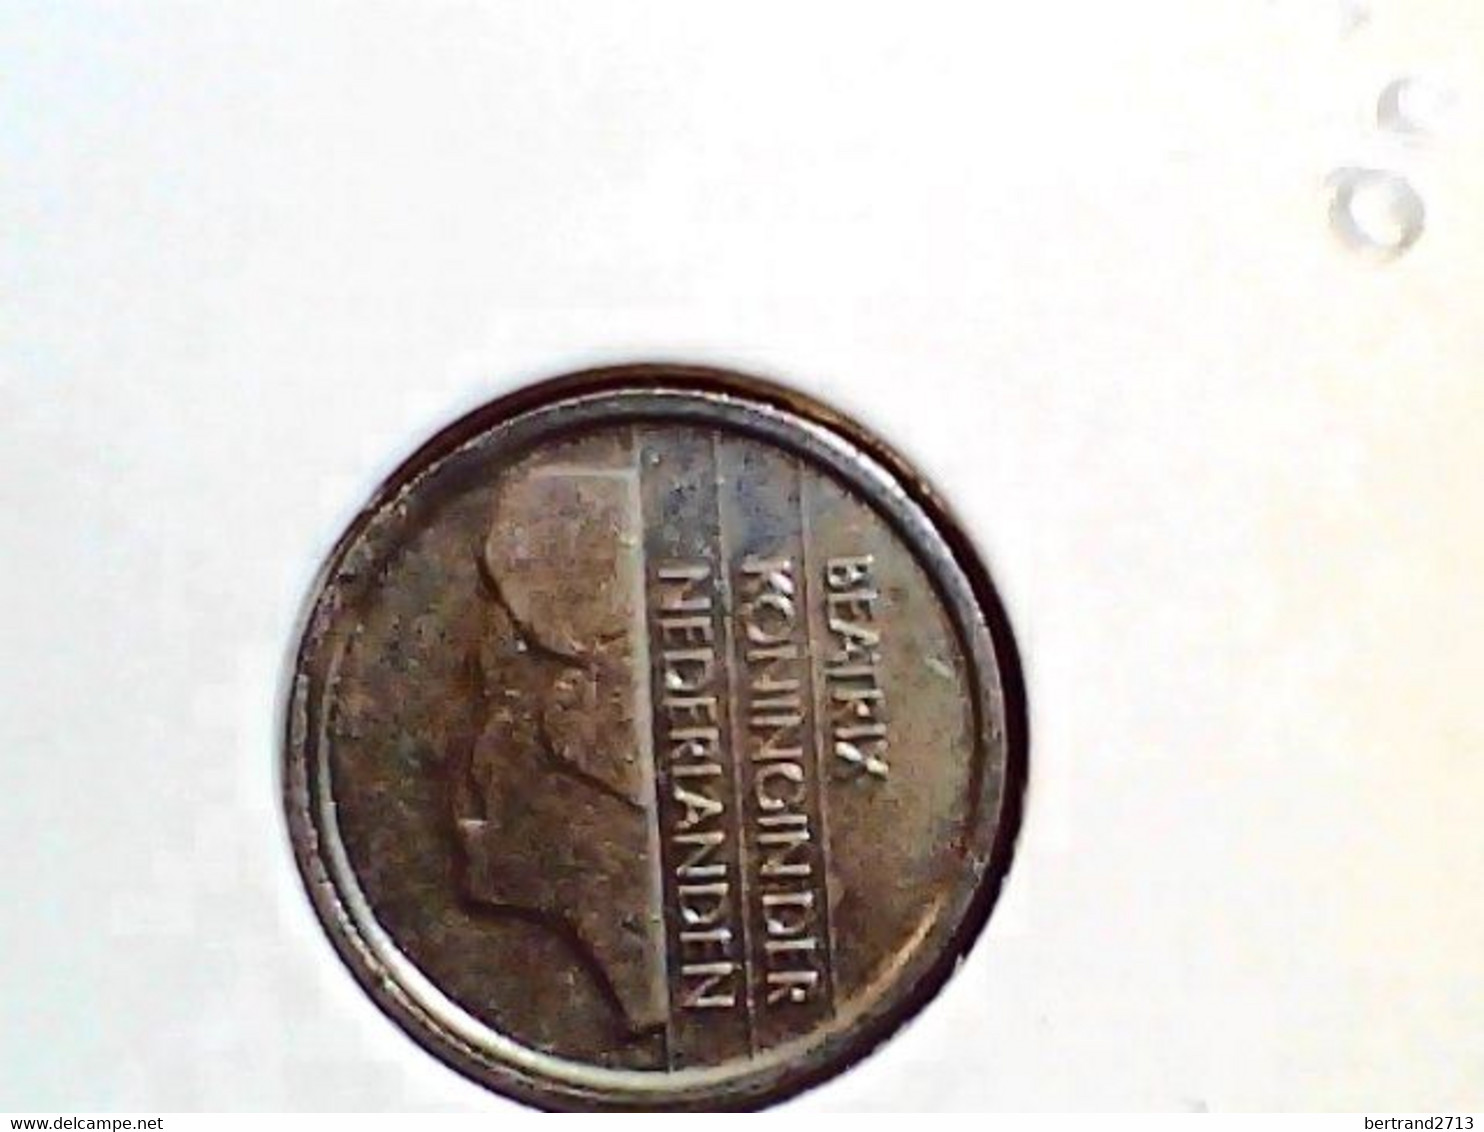 Netherlands 25 Cents 1992 KM 204 - Trade Coins